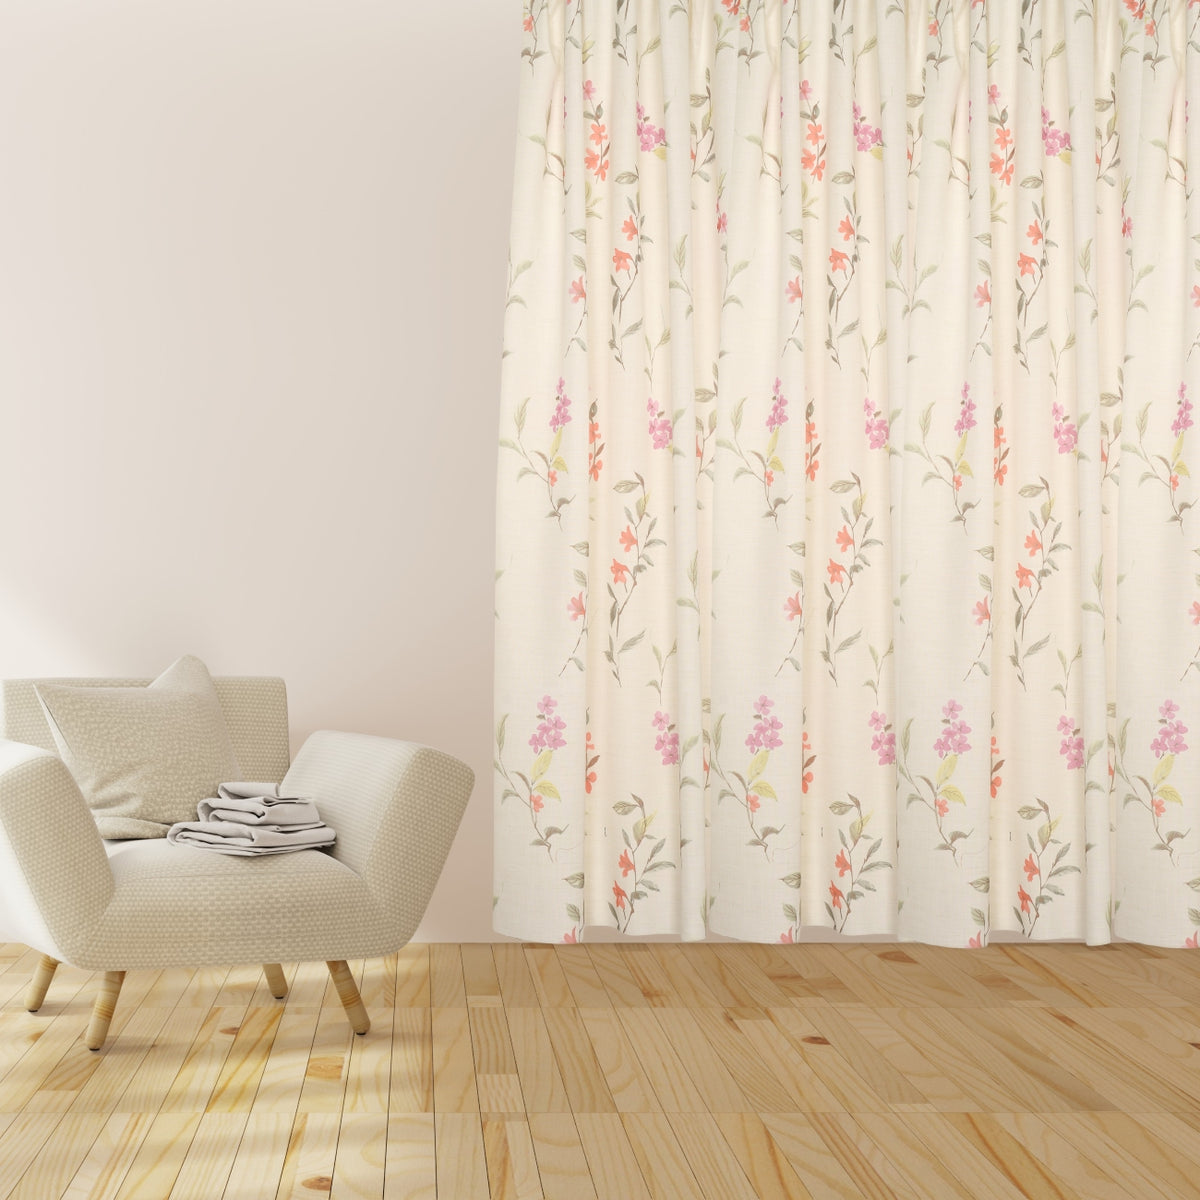 Night curtain pink red floral stone